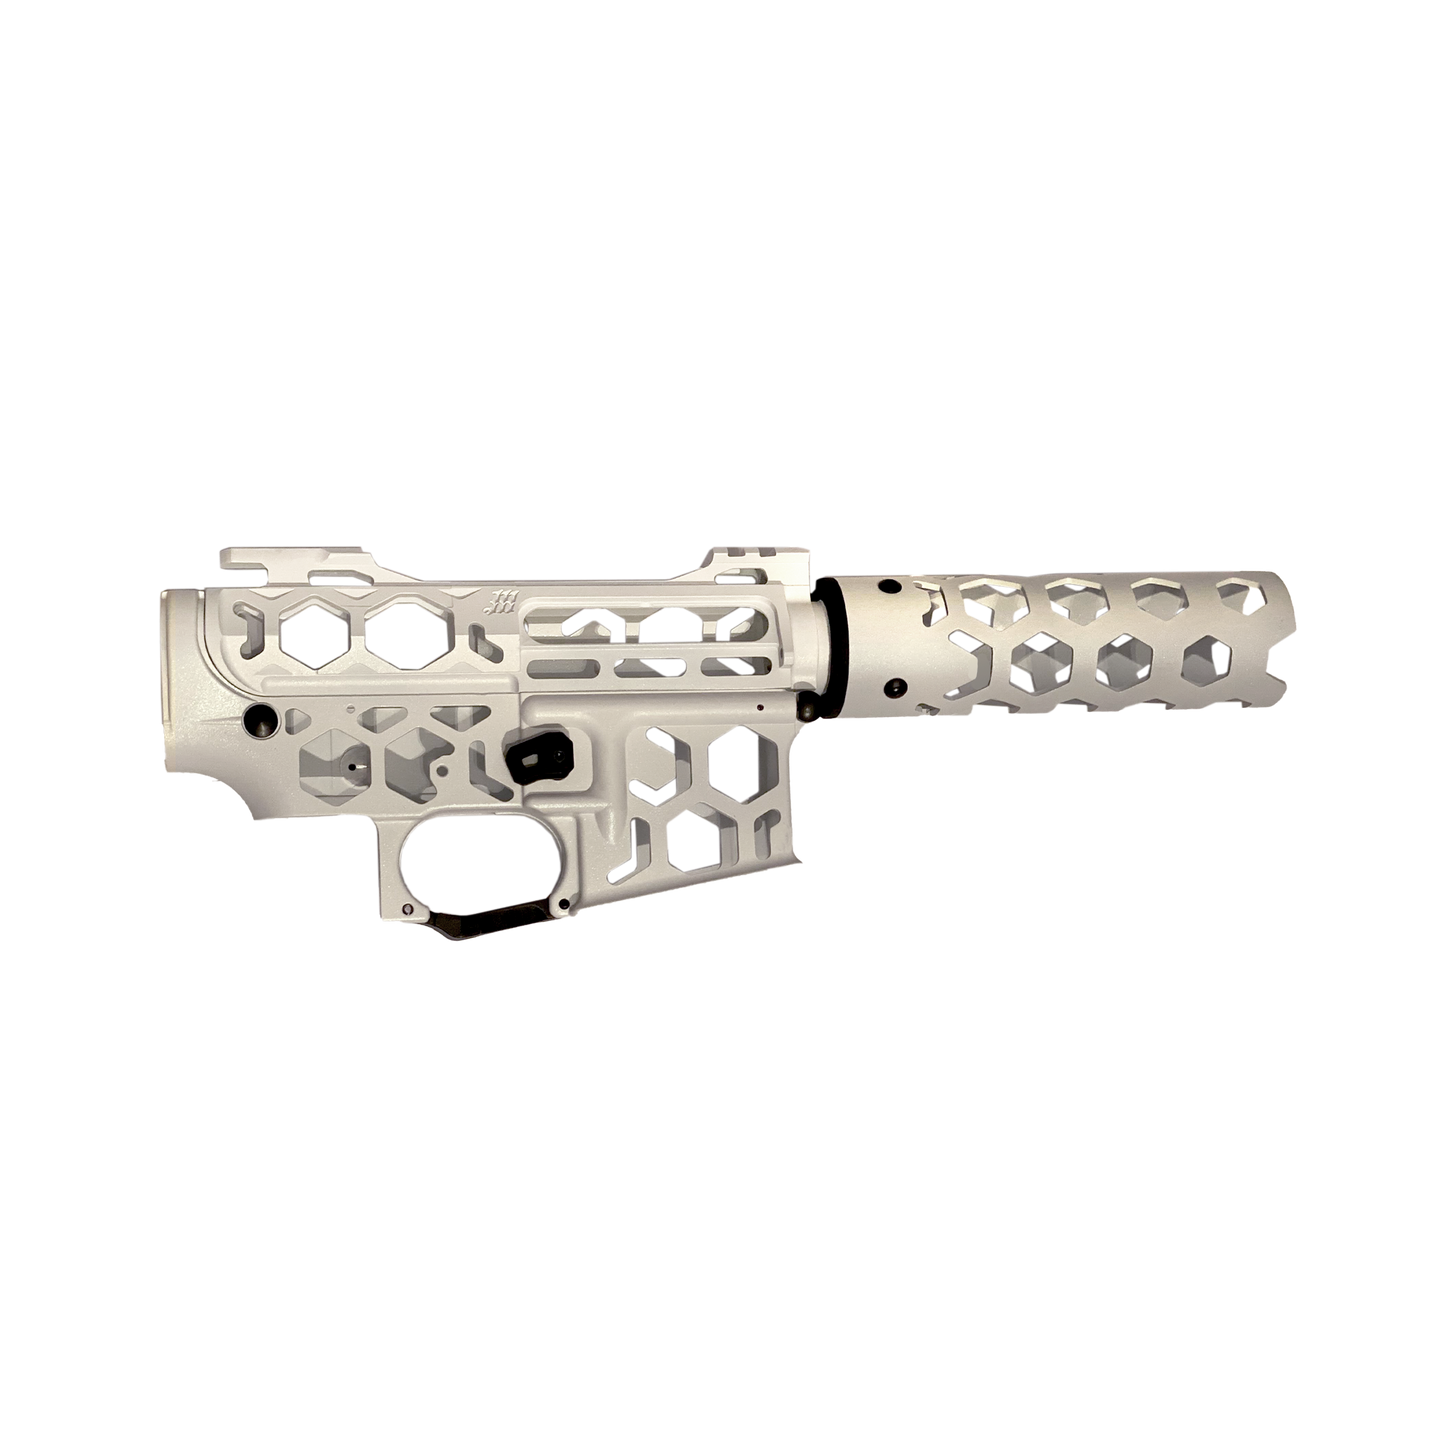 (DISCONTINUED) Monk Customs Neo3 Receiver + Handguard -  White